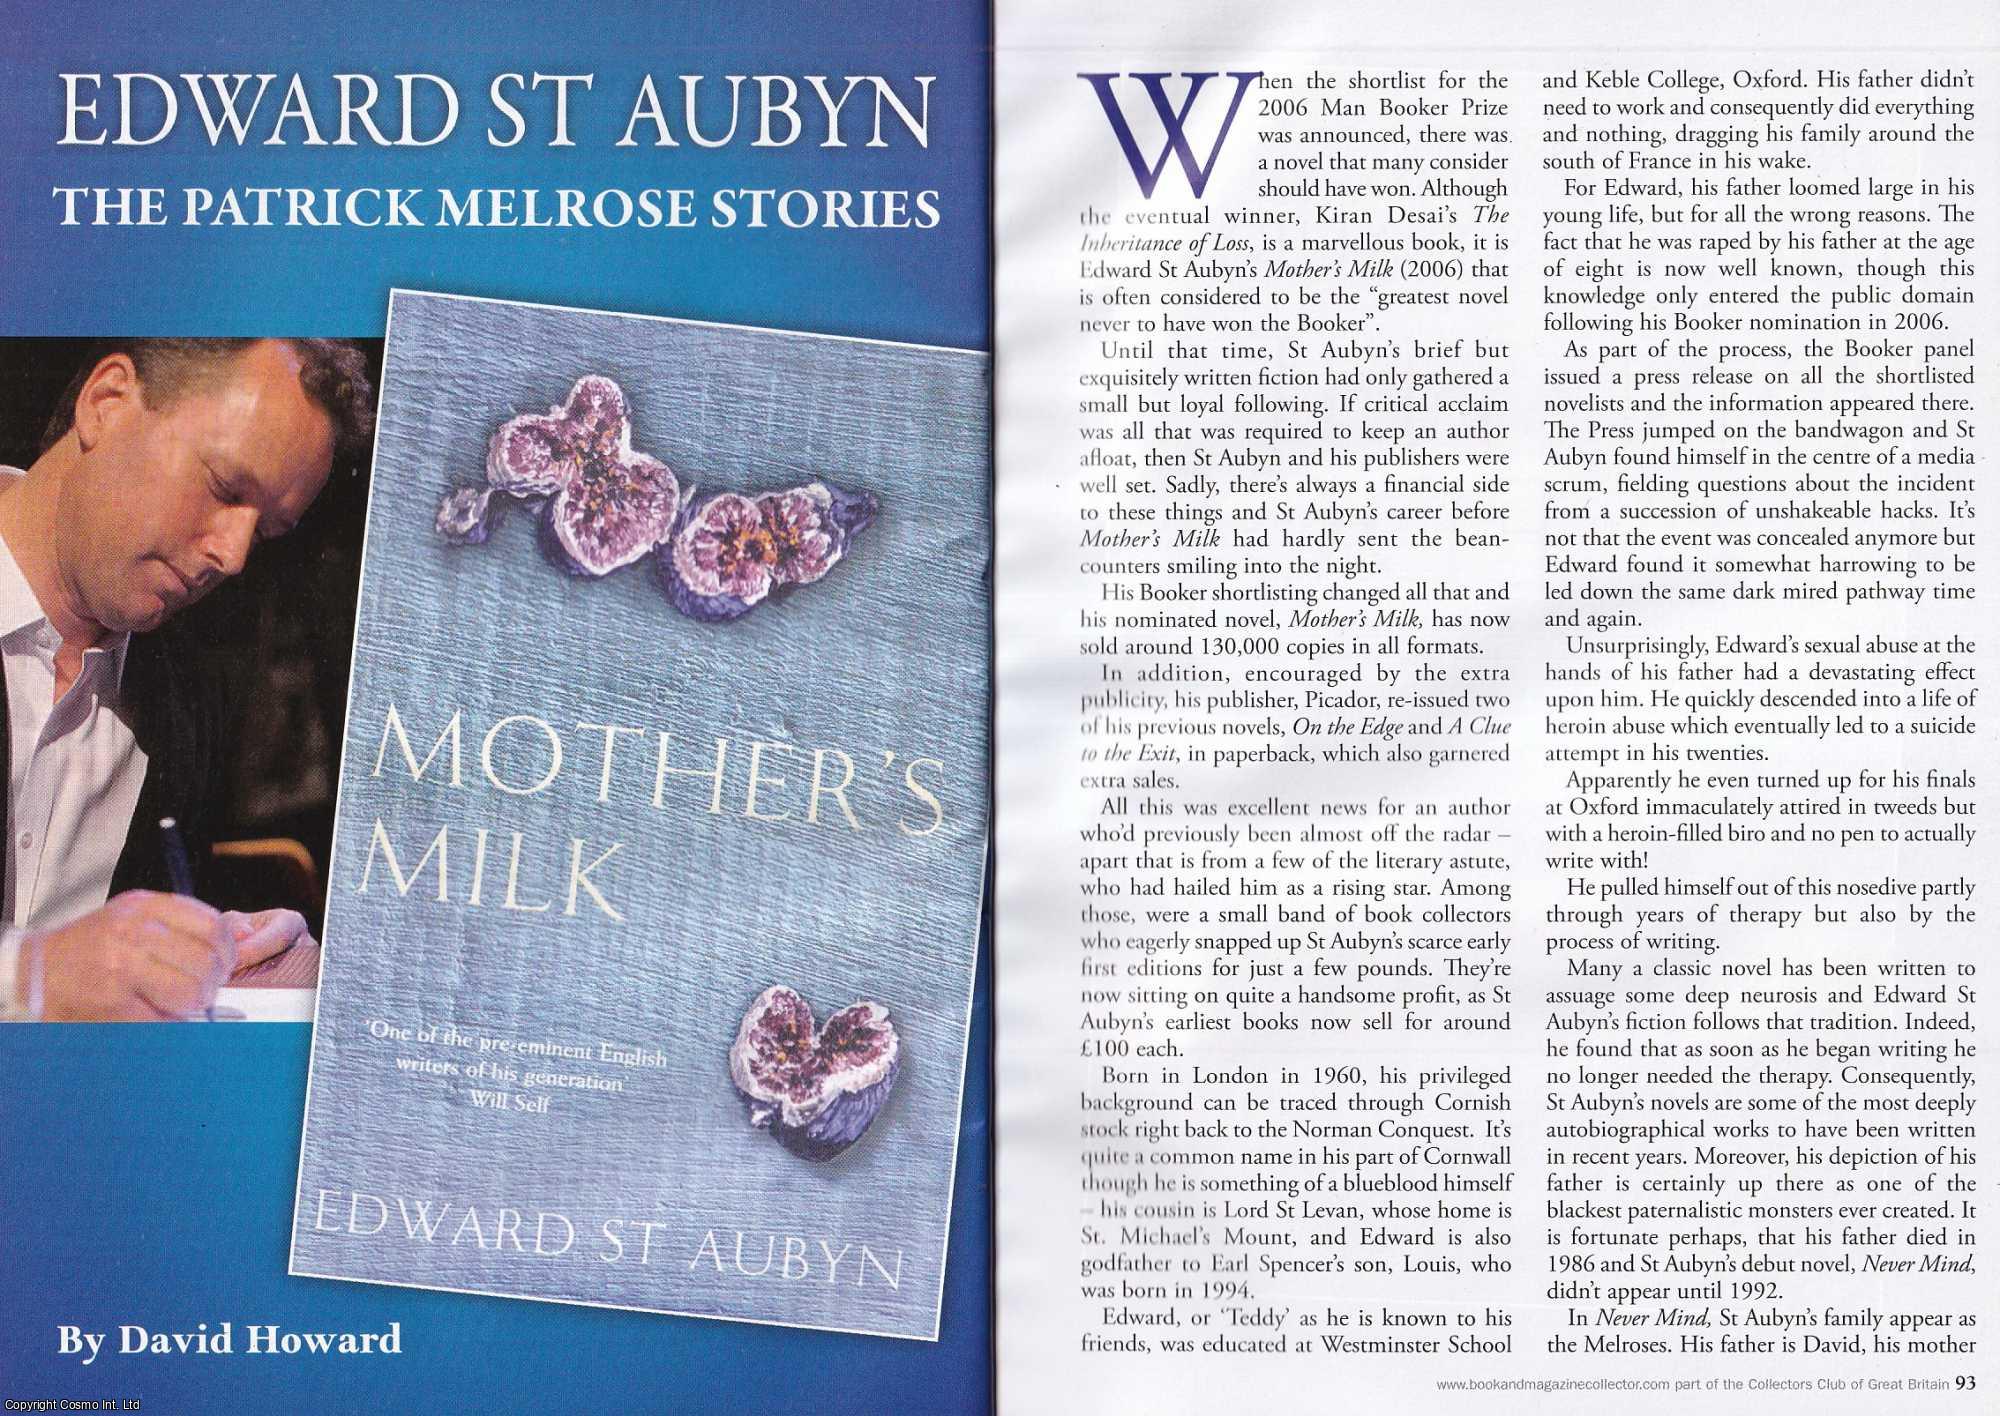 David Howard - Edward St. Aubyn : The Patrick Melrose Stories. This is an original article separated from an issue of The Book & Magazine Collector publication, 2010.